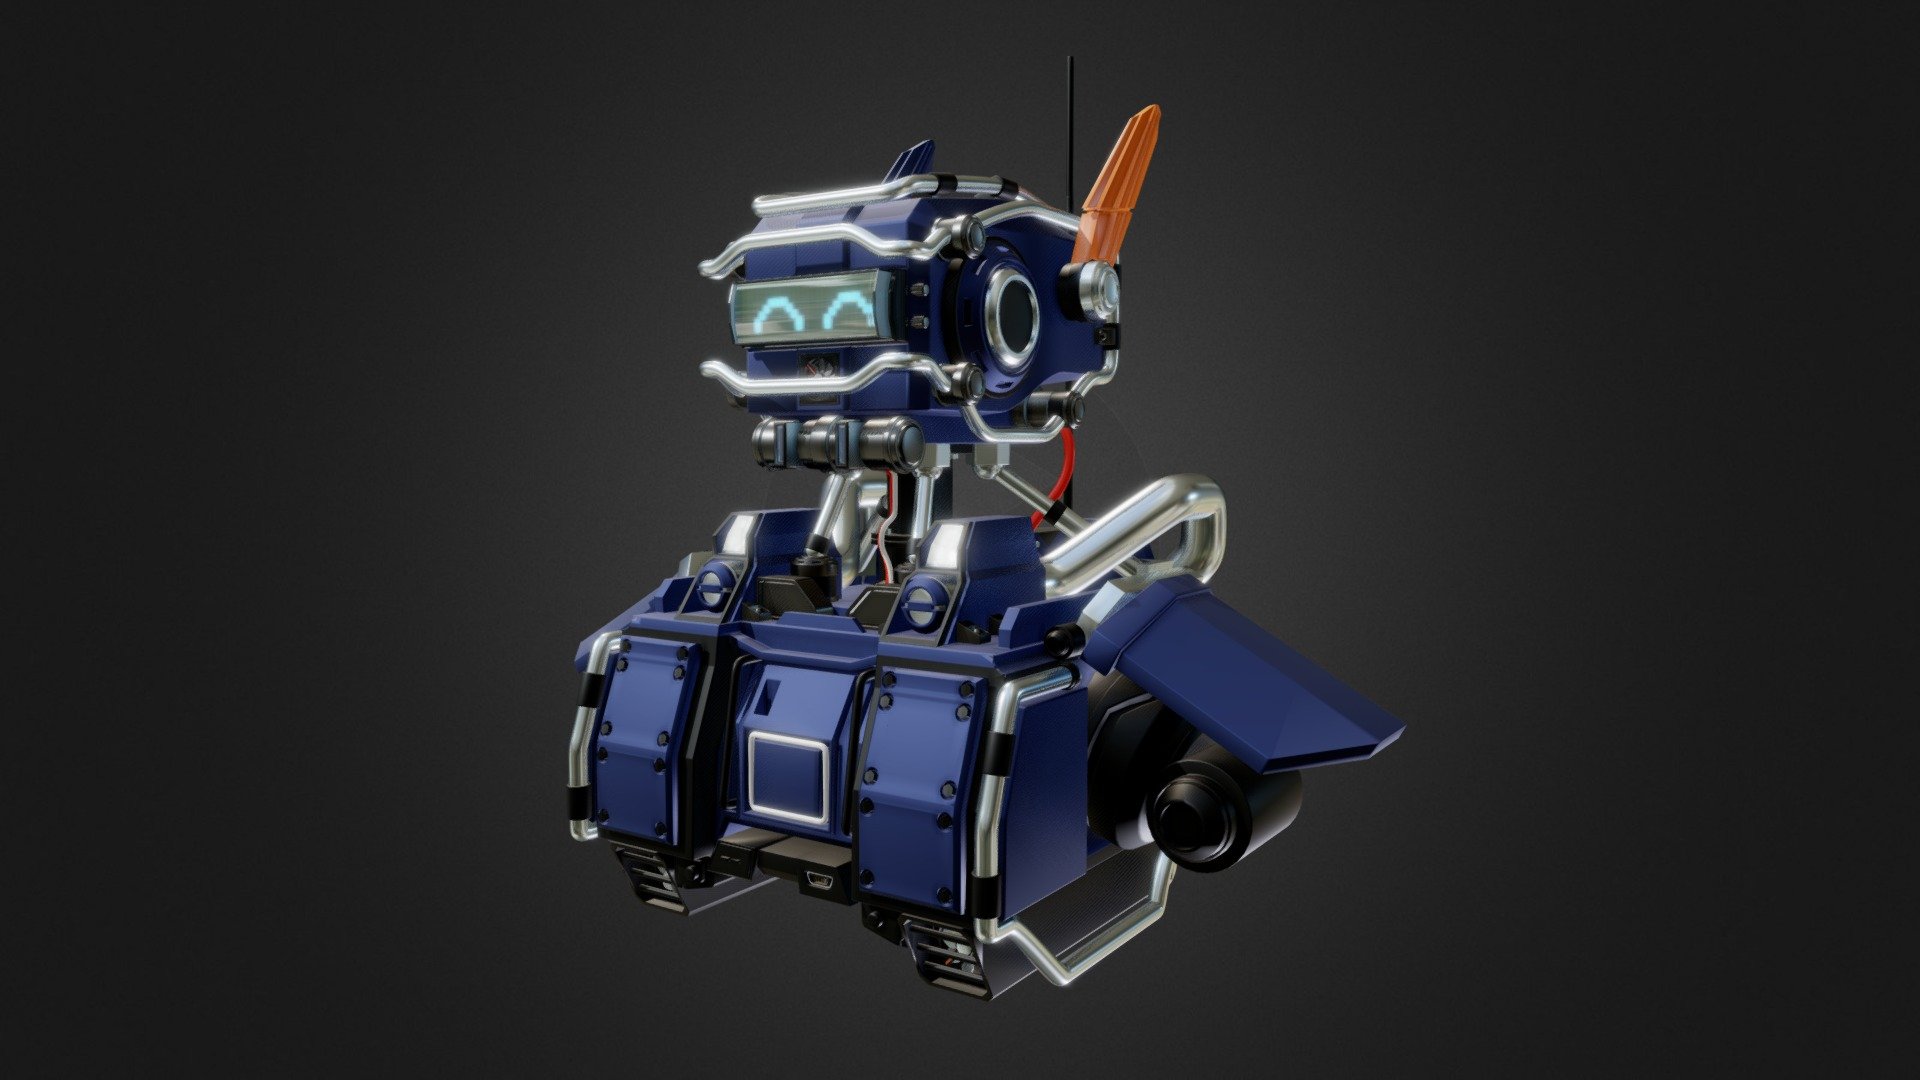 WIP of a VERY Chappie inspired little robot.

So far the uper body, shoulders, and head are done. Need to work on the lower body, legs, and arms 3d model